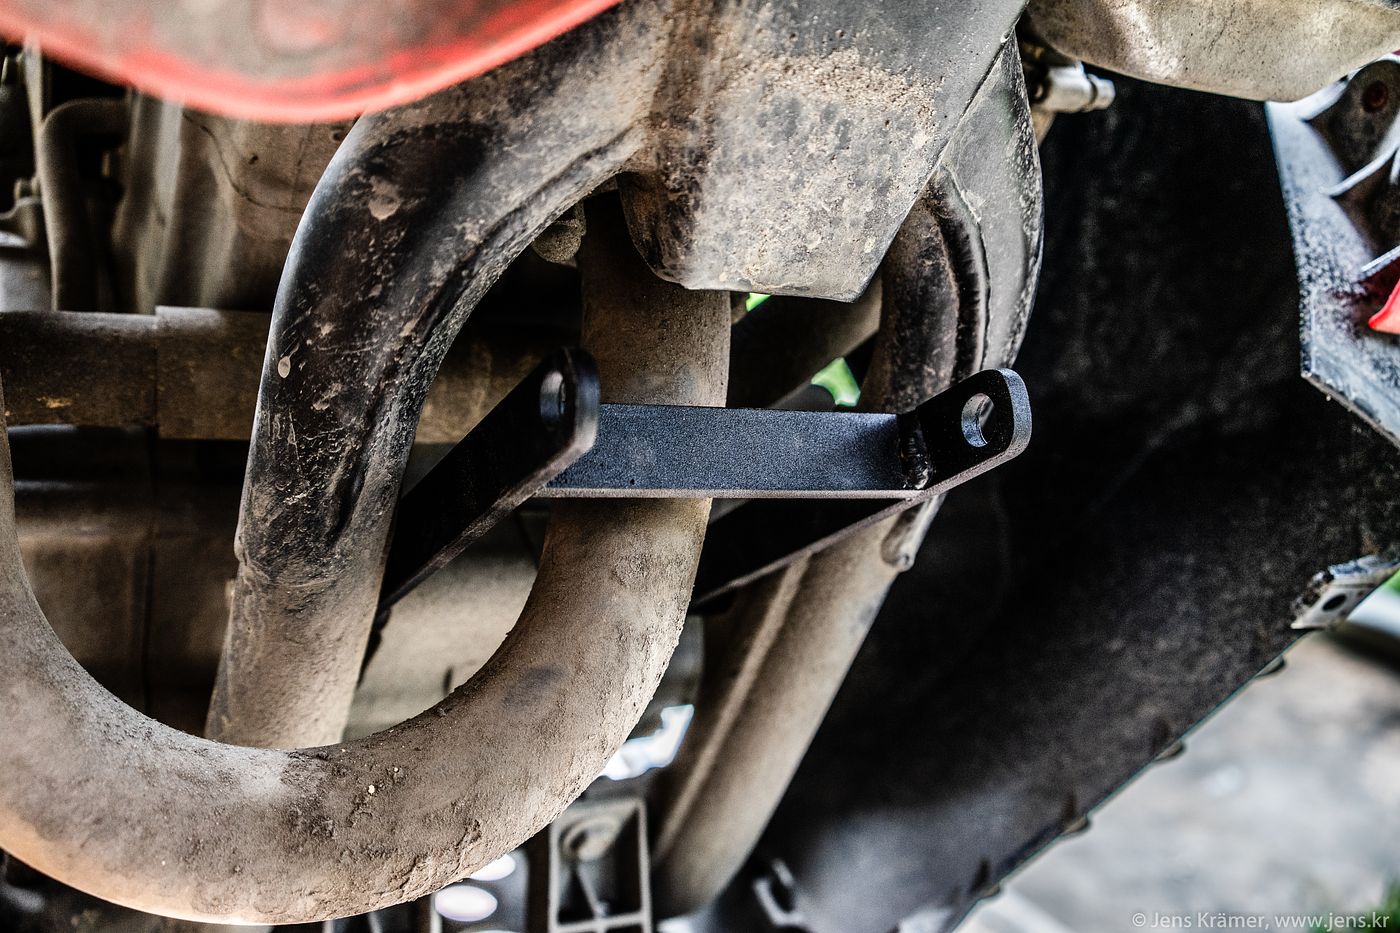 This H-shaped mount connects the bars to the frame in the front